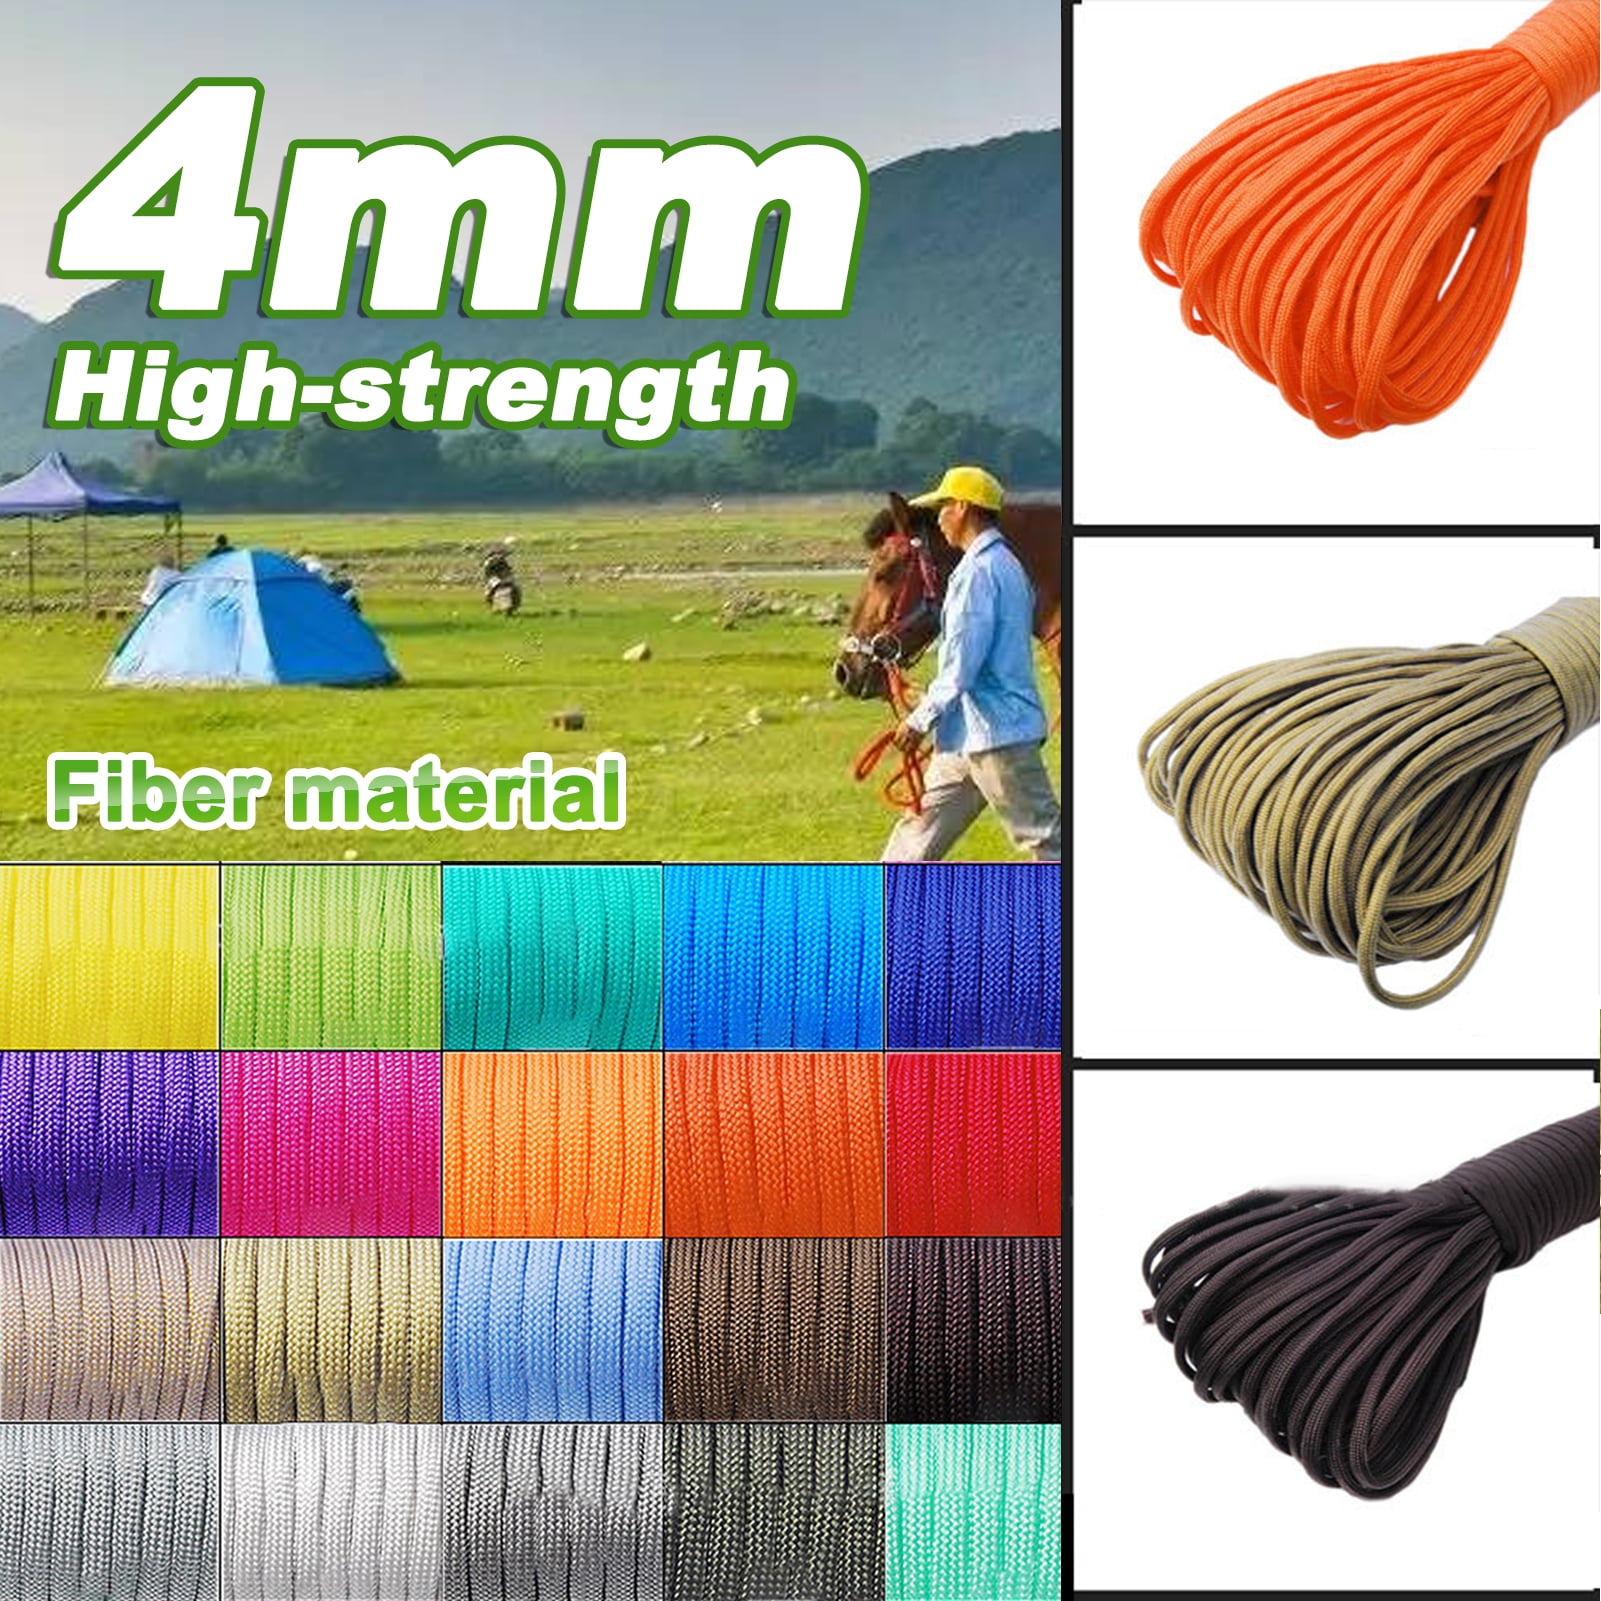 10 METRES 4MM REFLECTIVE FLUORESCENT GUY LINE ROPE TENT CARAVAN AWNING CAMPING 